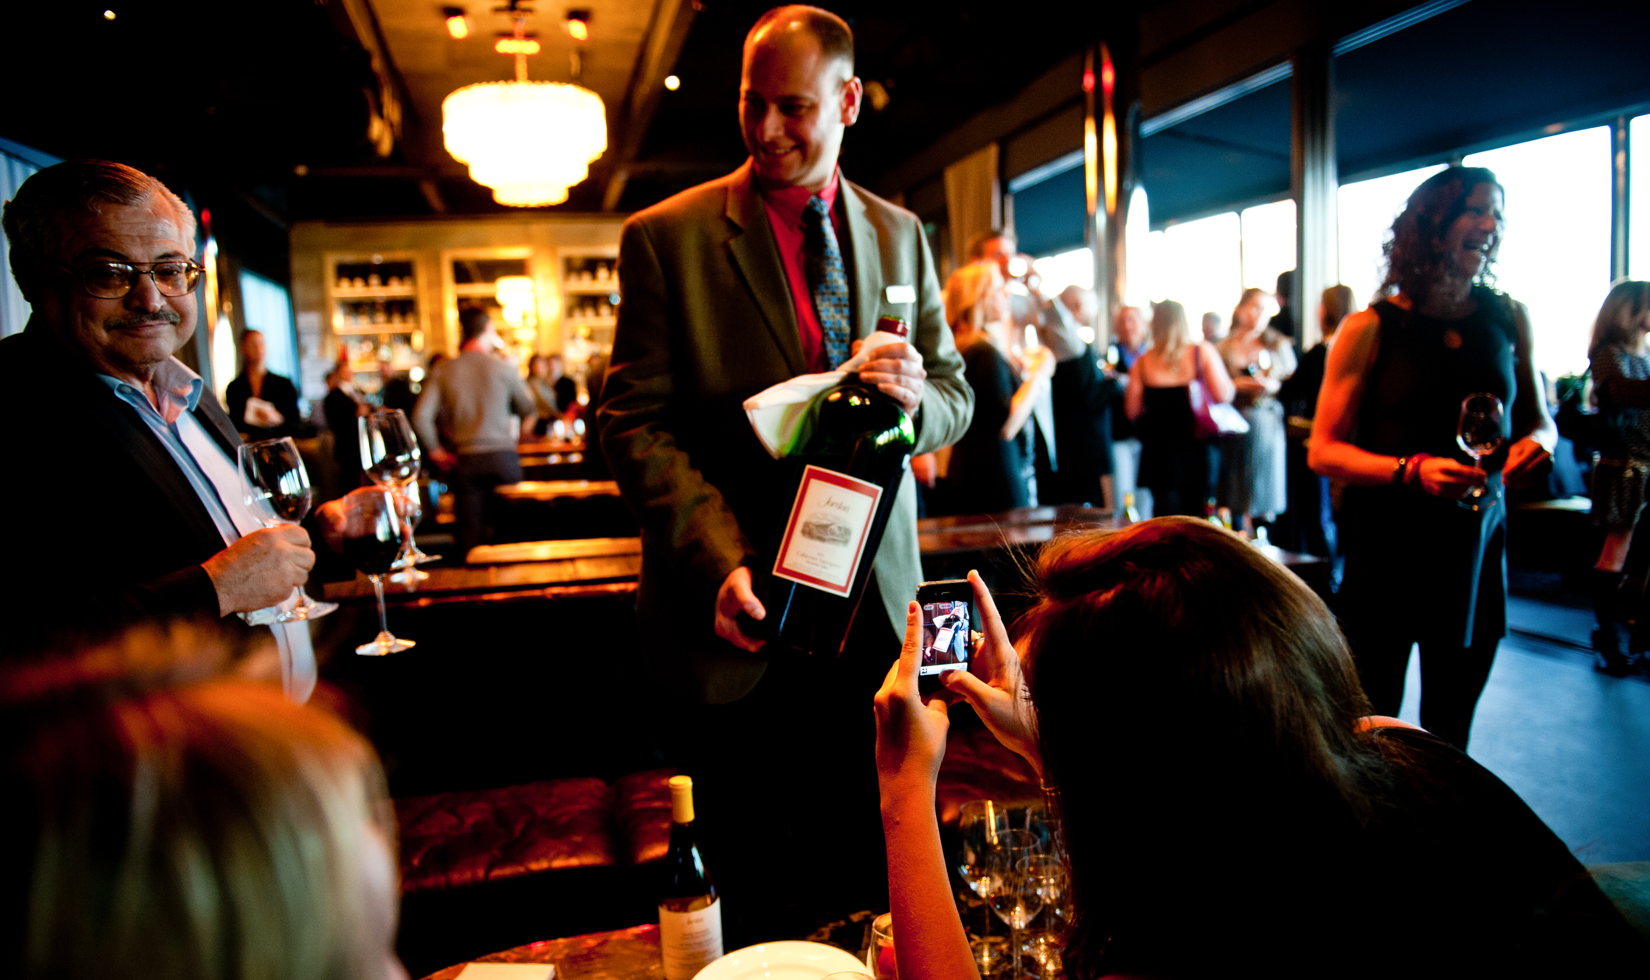 server holding large bottle of wine while someone takes a photo